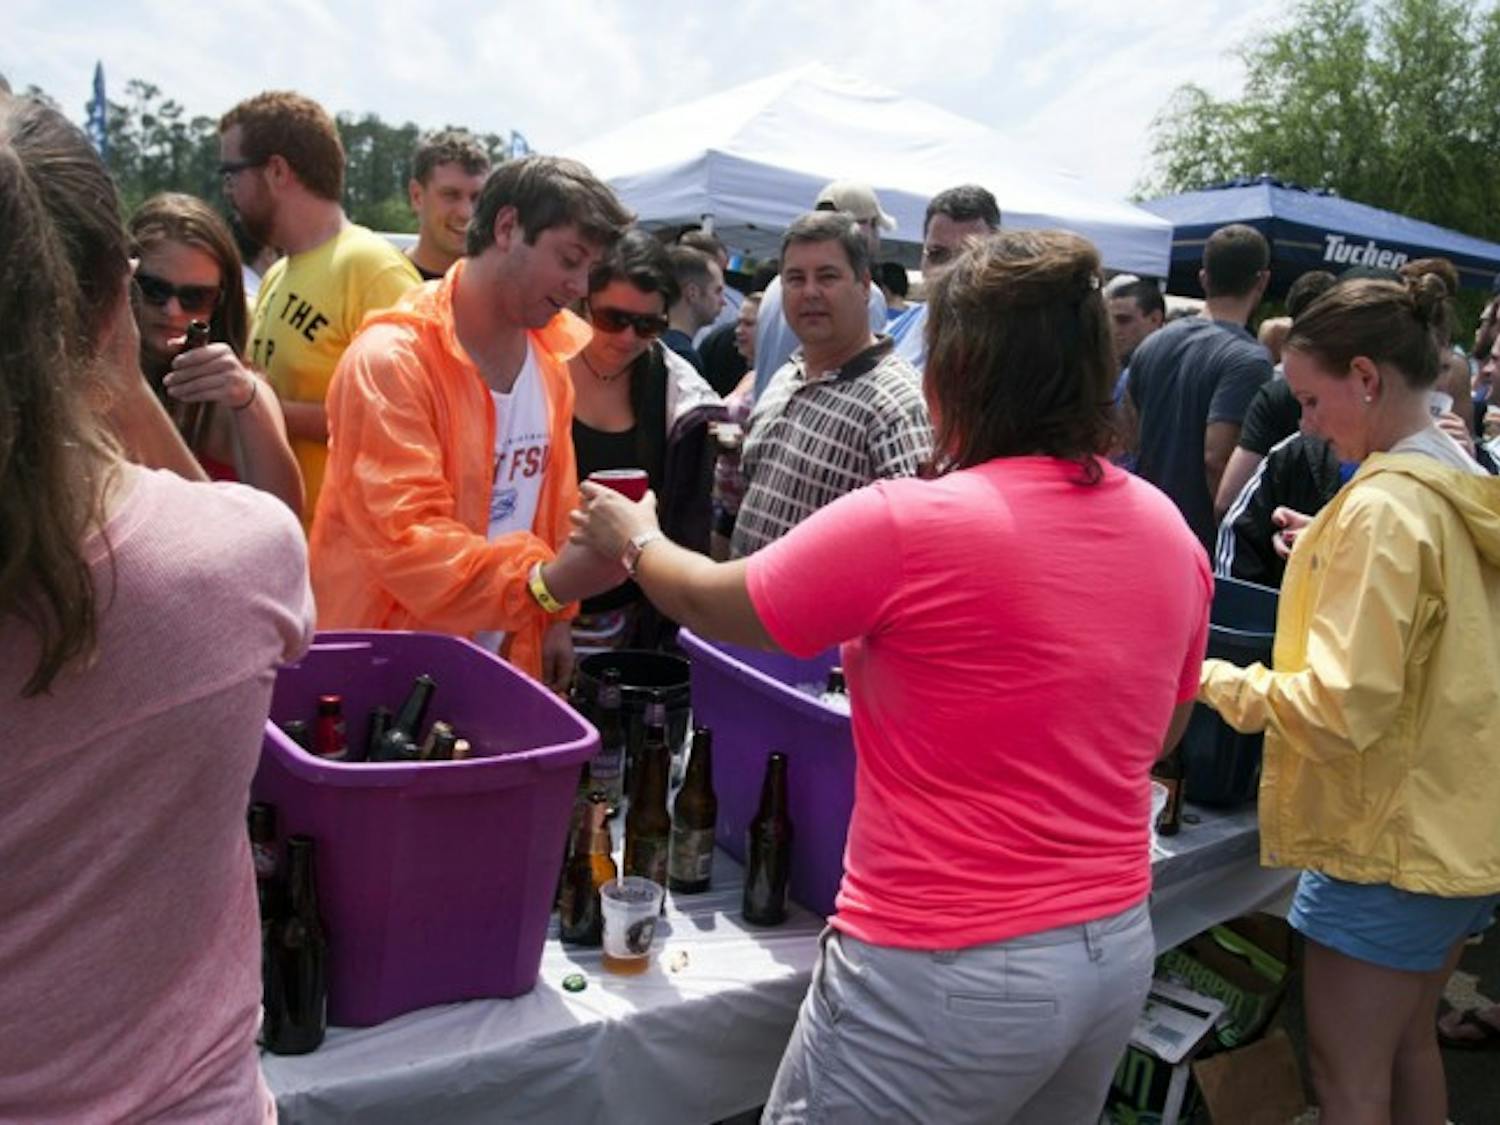 Wendell Stainsby, a 22-year-old environmental engineering major, picks up a craft beer from 22-year-old marketing major, Chelsea Schaffer, at the Greater Gator Beer Festival on Saturday.